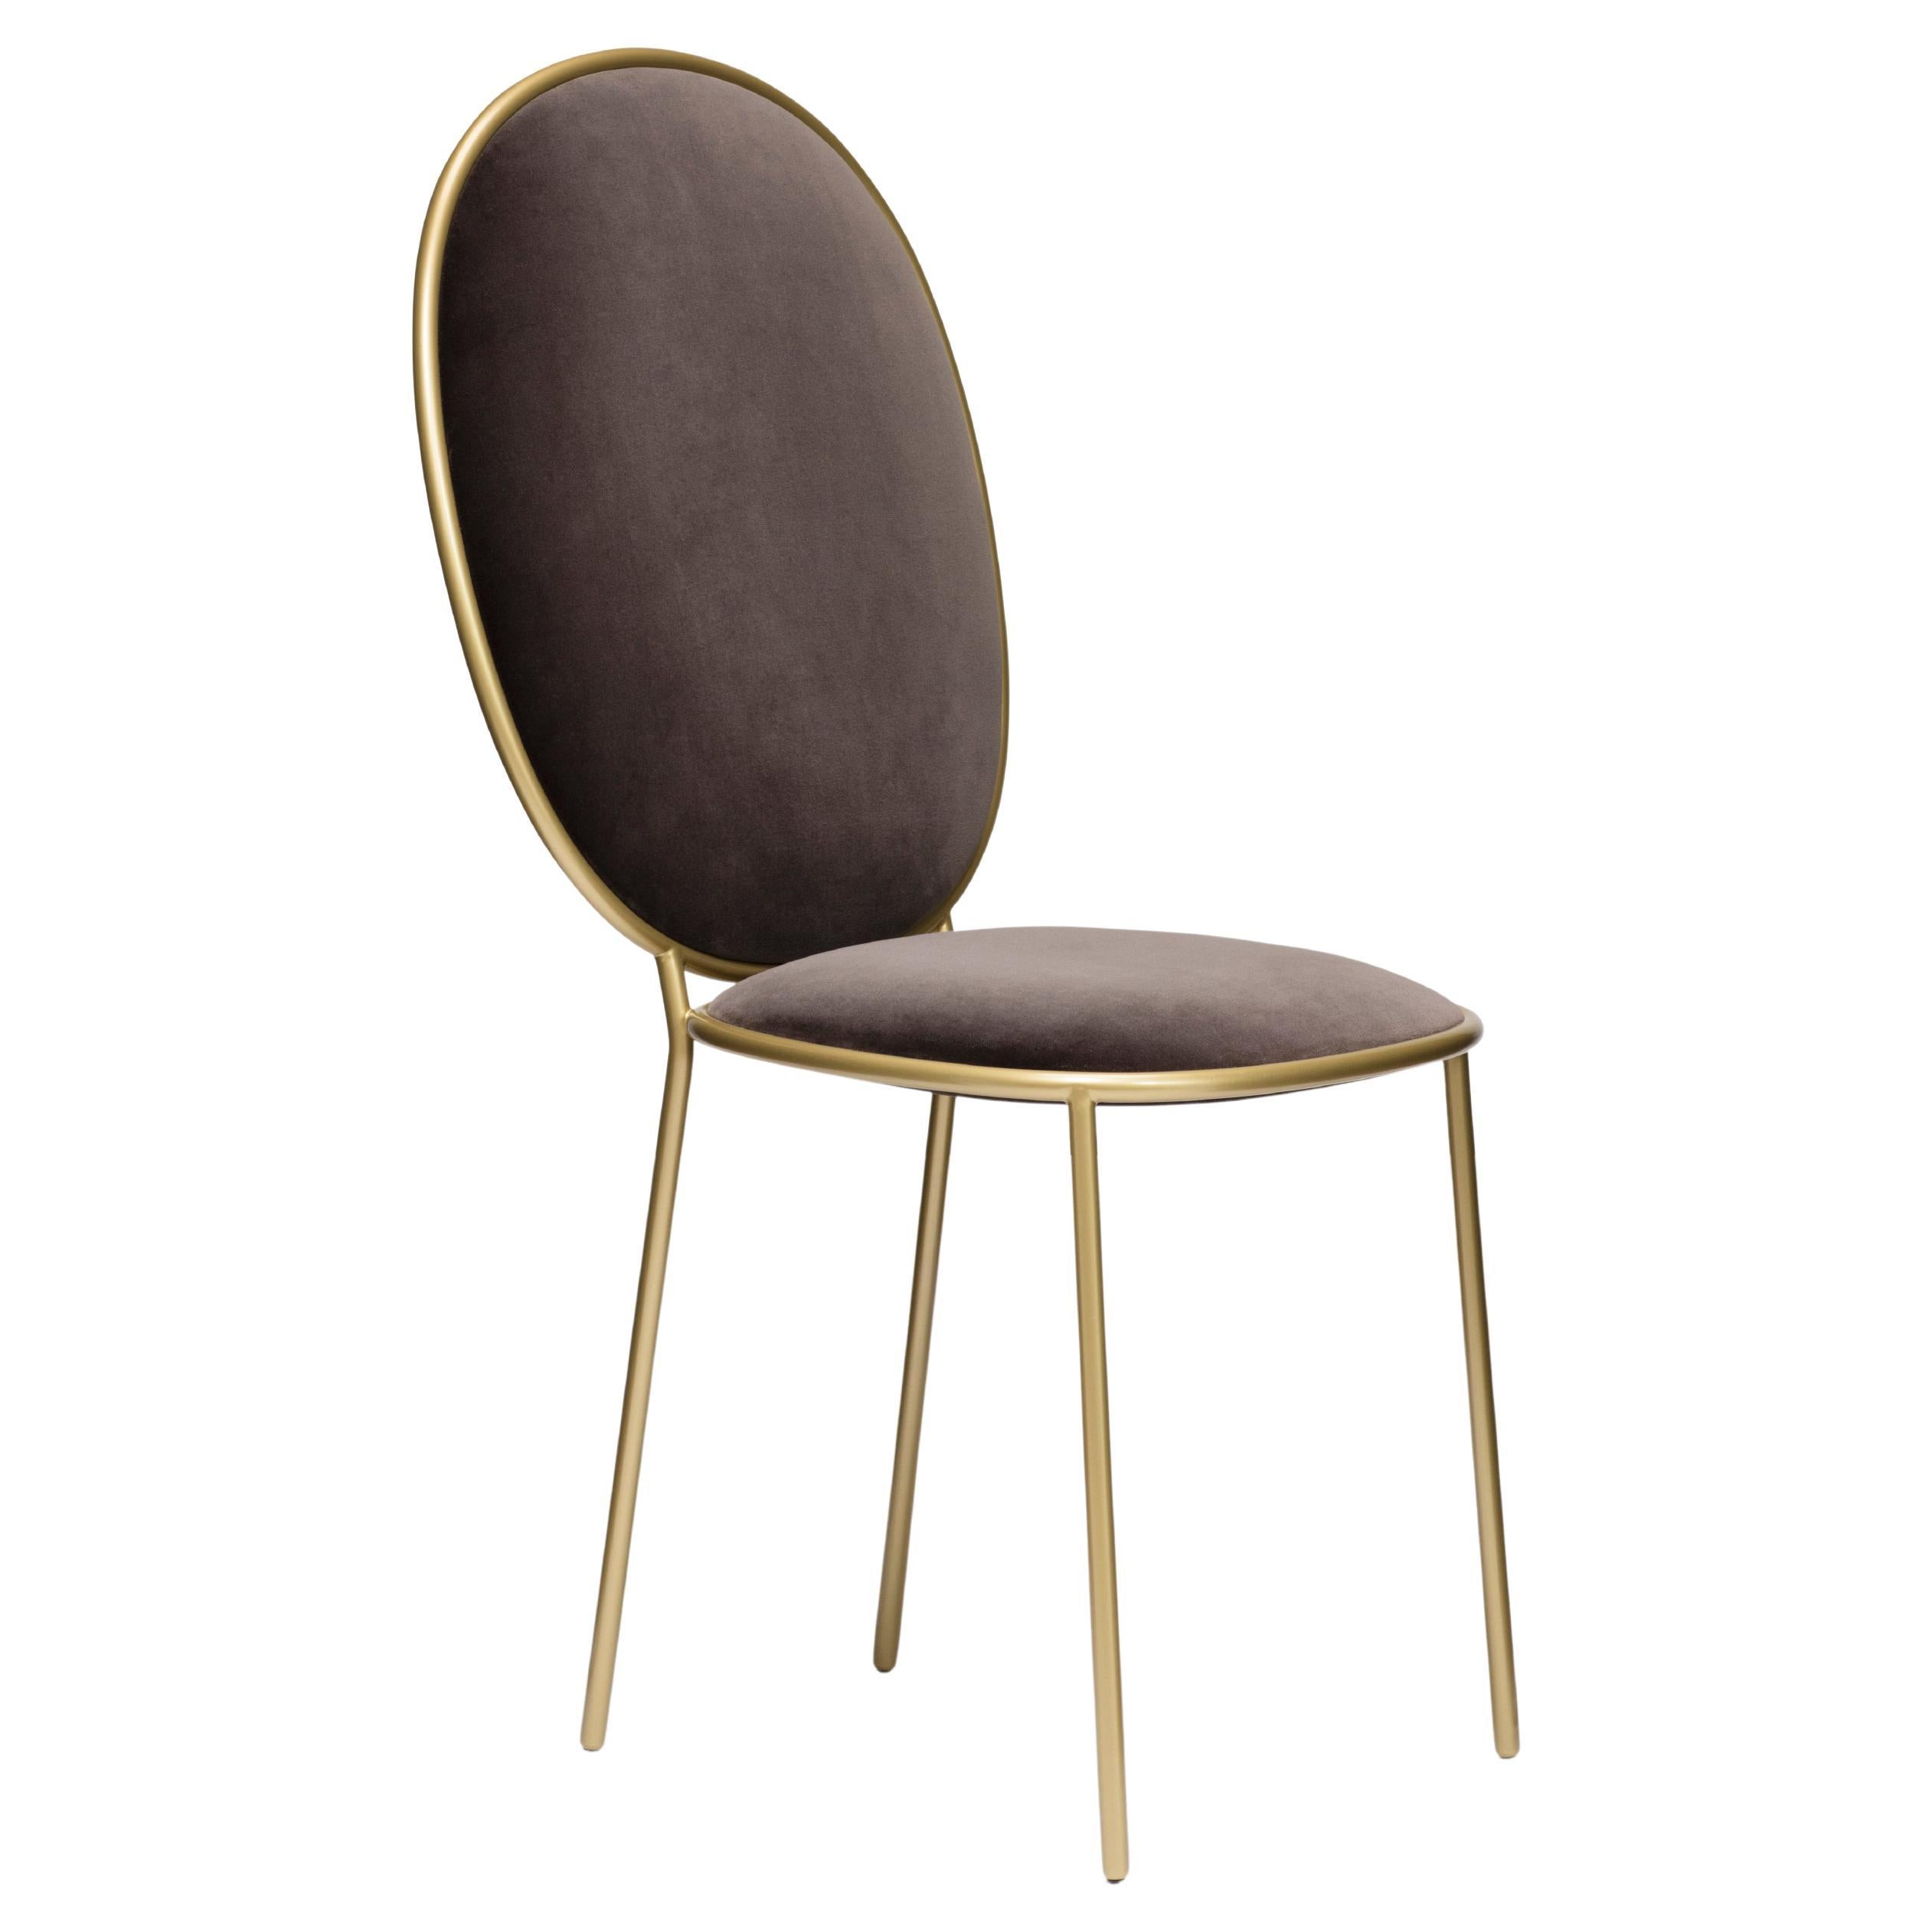 Contemporary Brown Velvet Upholstered Dining Chair, Stay by Nika Zupanc